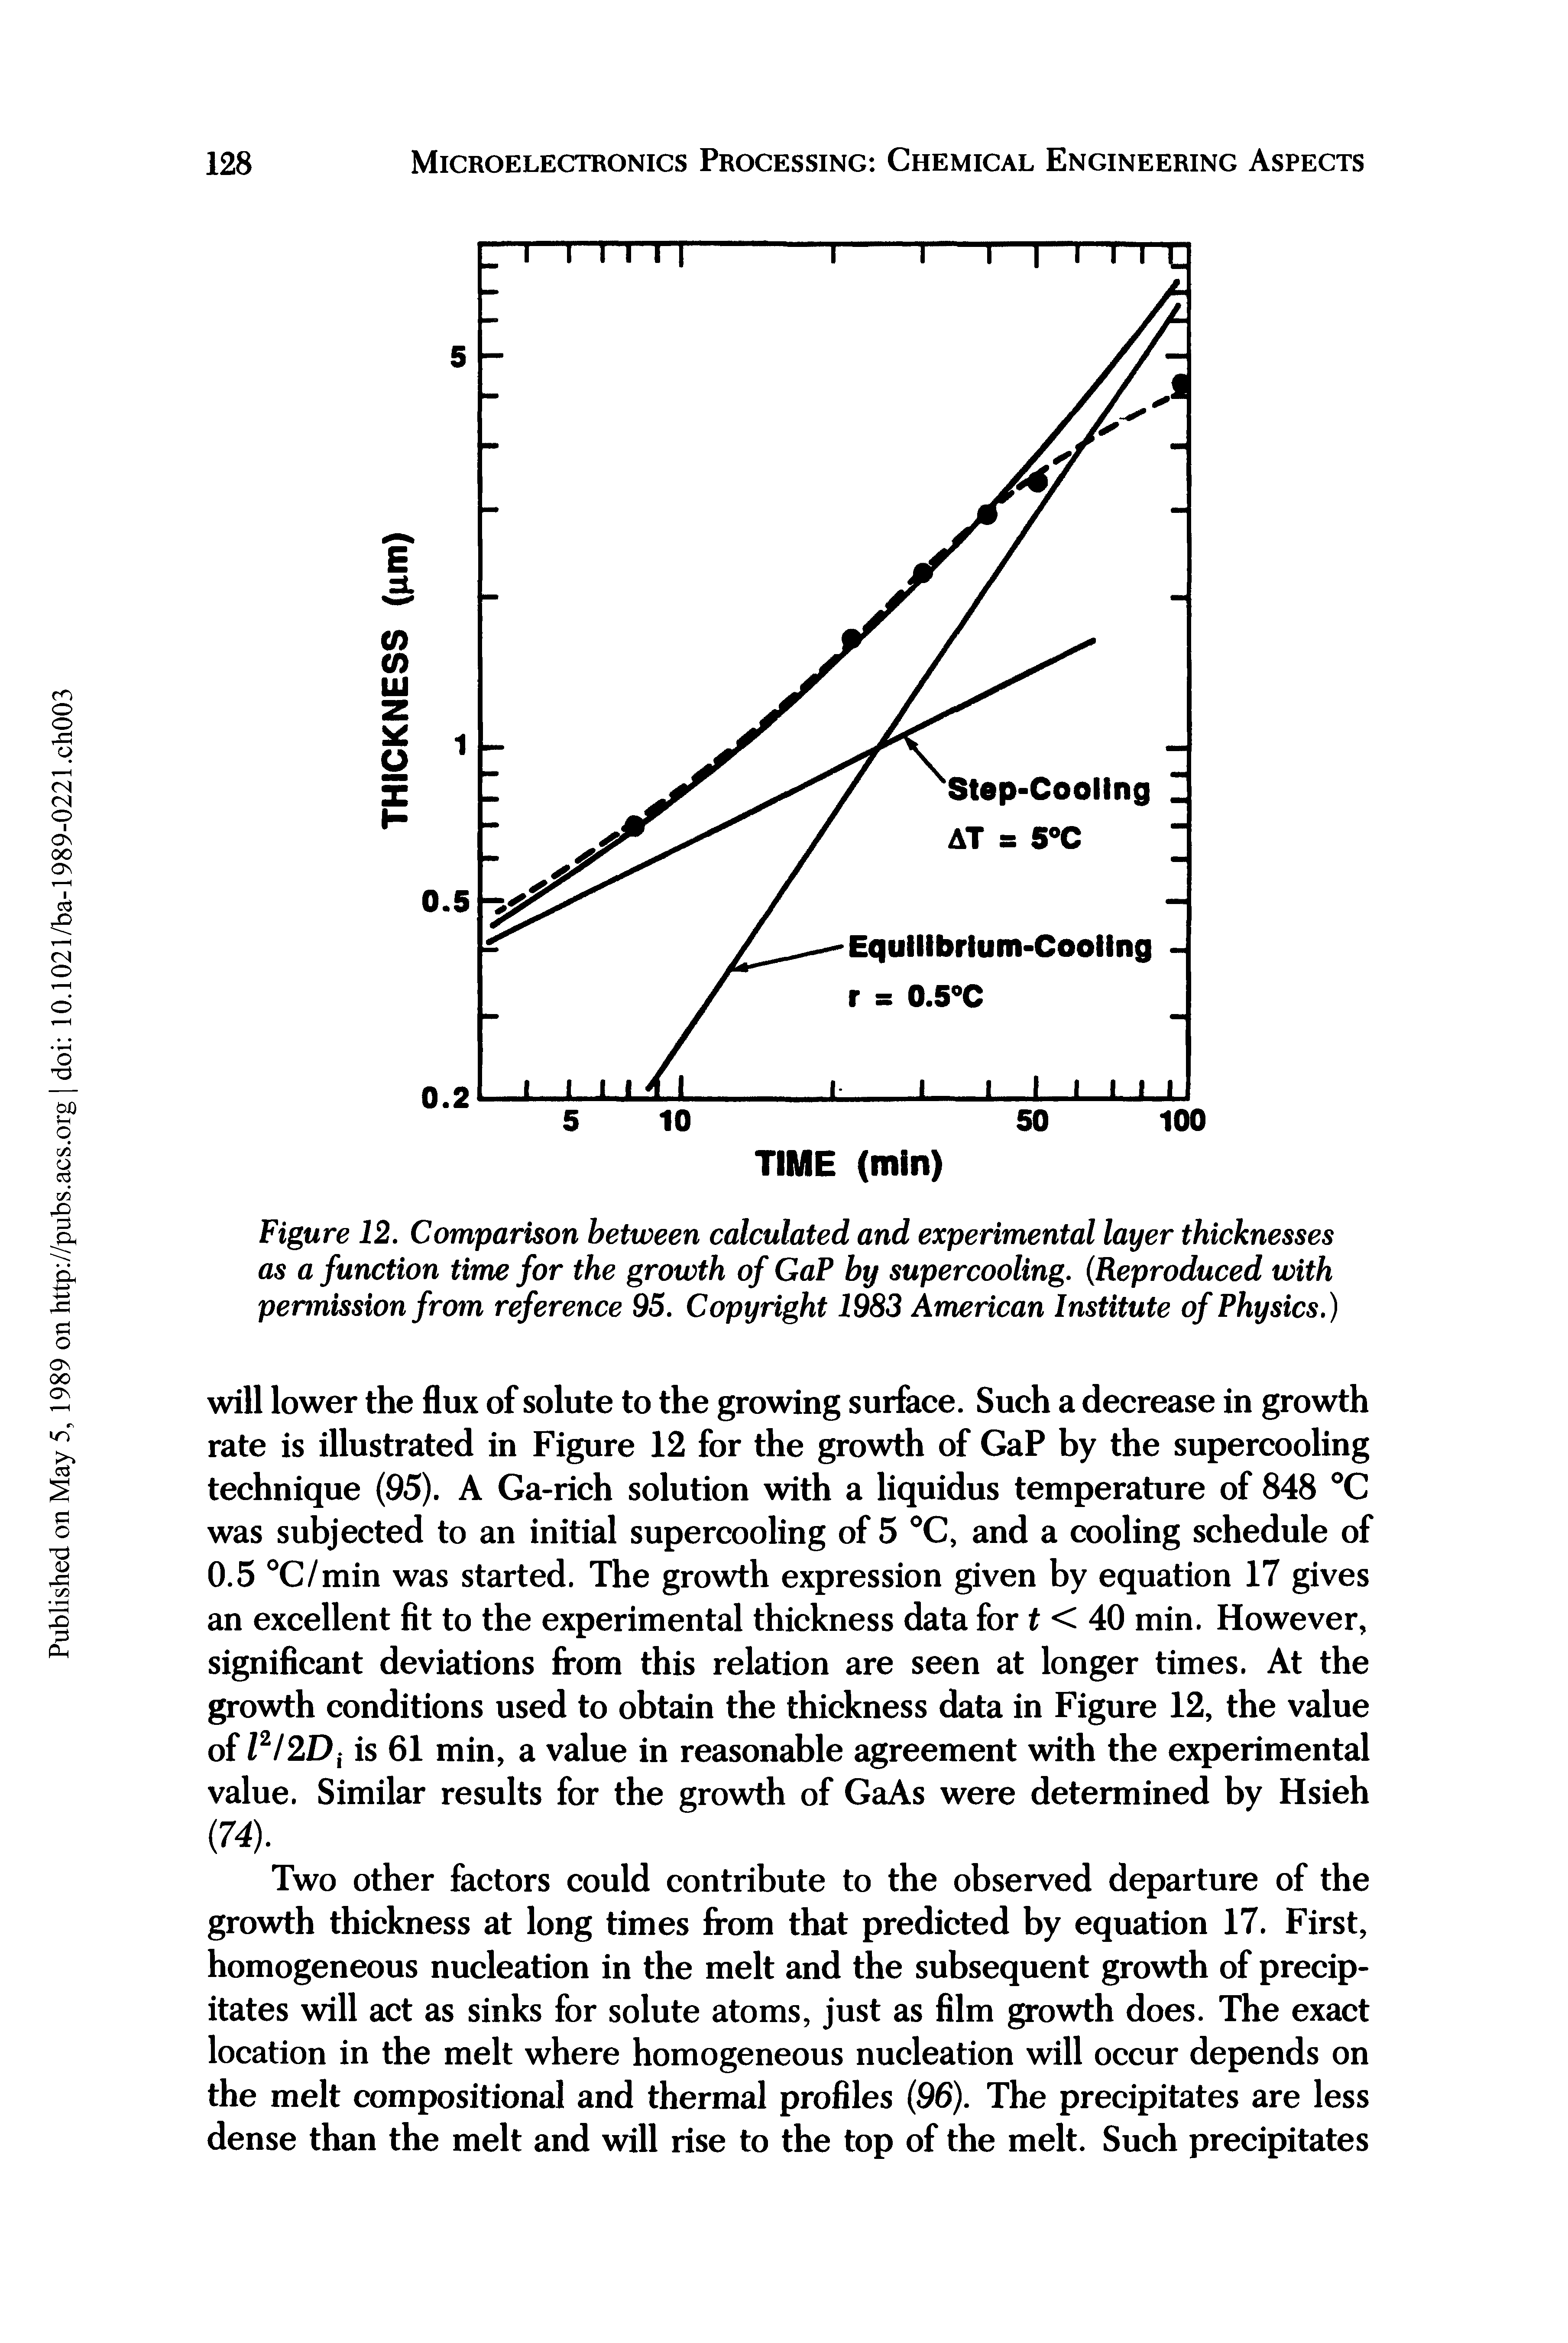 Figure 12. Comparison between calculated and experimental layer thicknesses as a function time for the growth of GaP by supercooling. (Reproduced with permission from reference 95. Copyright 1983 American Institute of Physics.)...